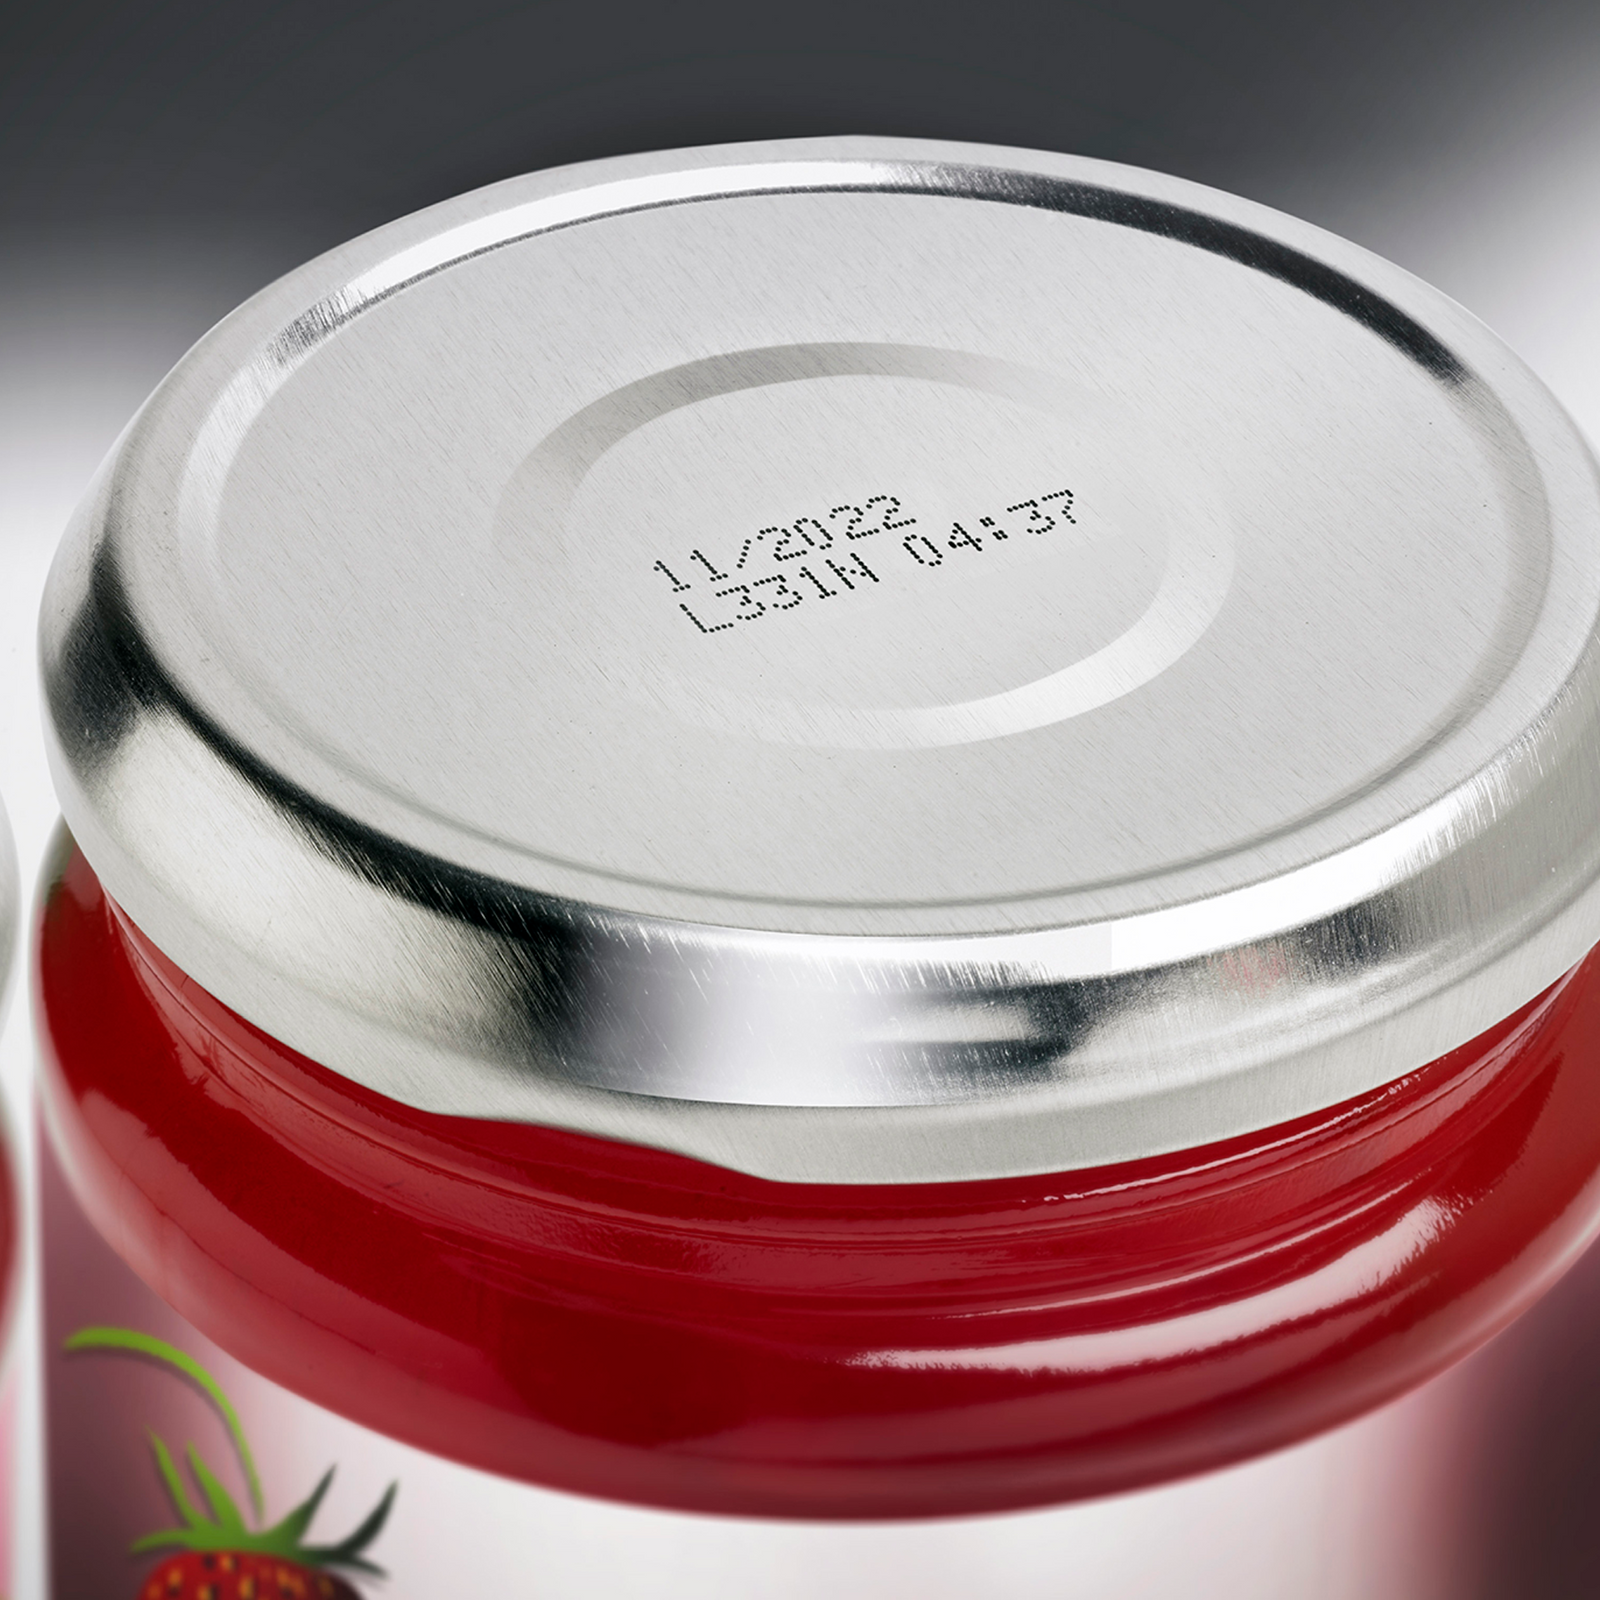 Metal lid of a jam container printed with date and time by an Inkjet LINX coder